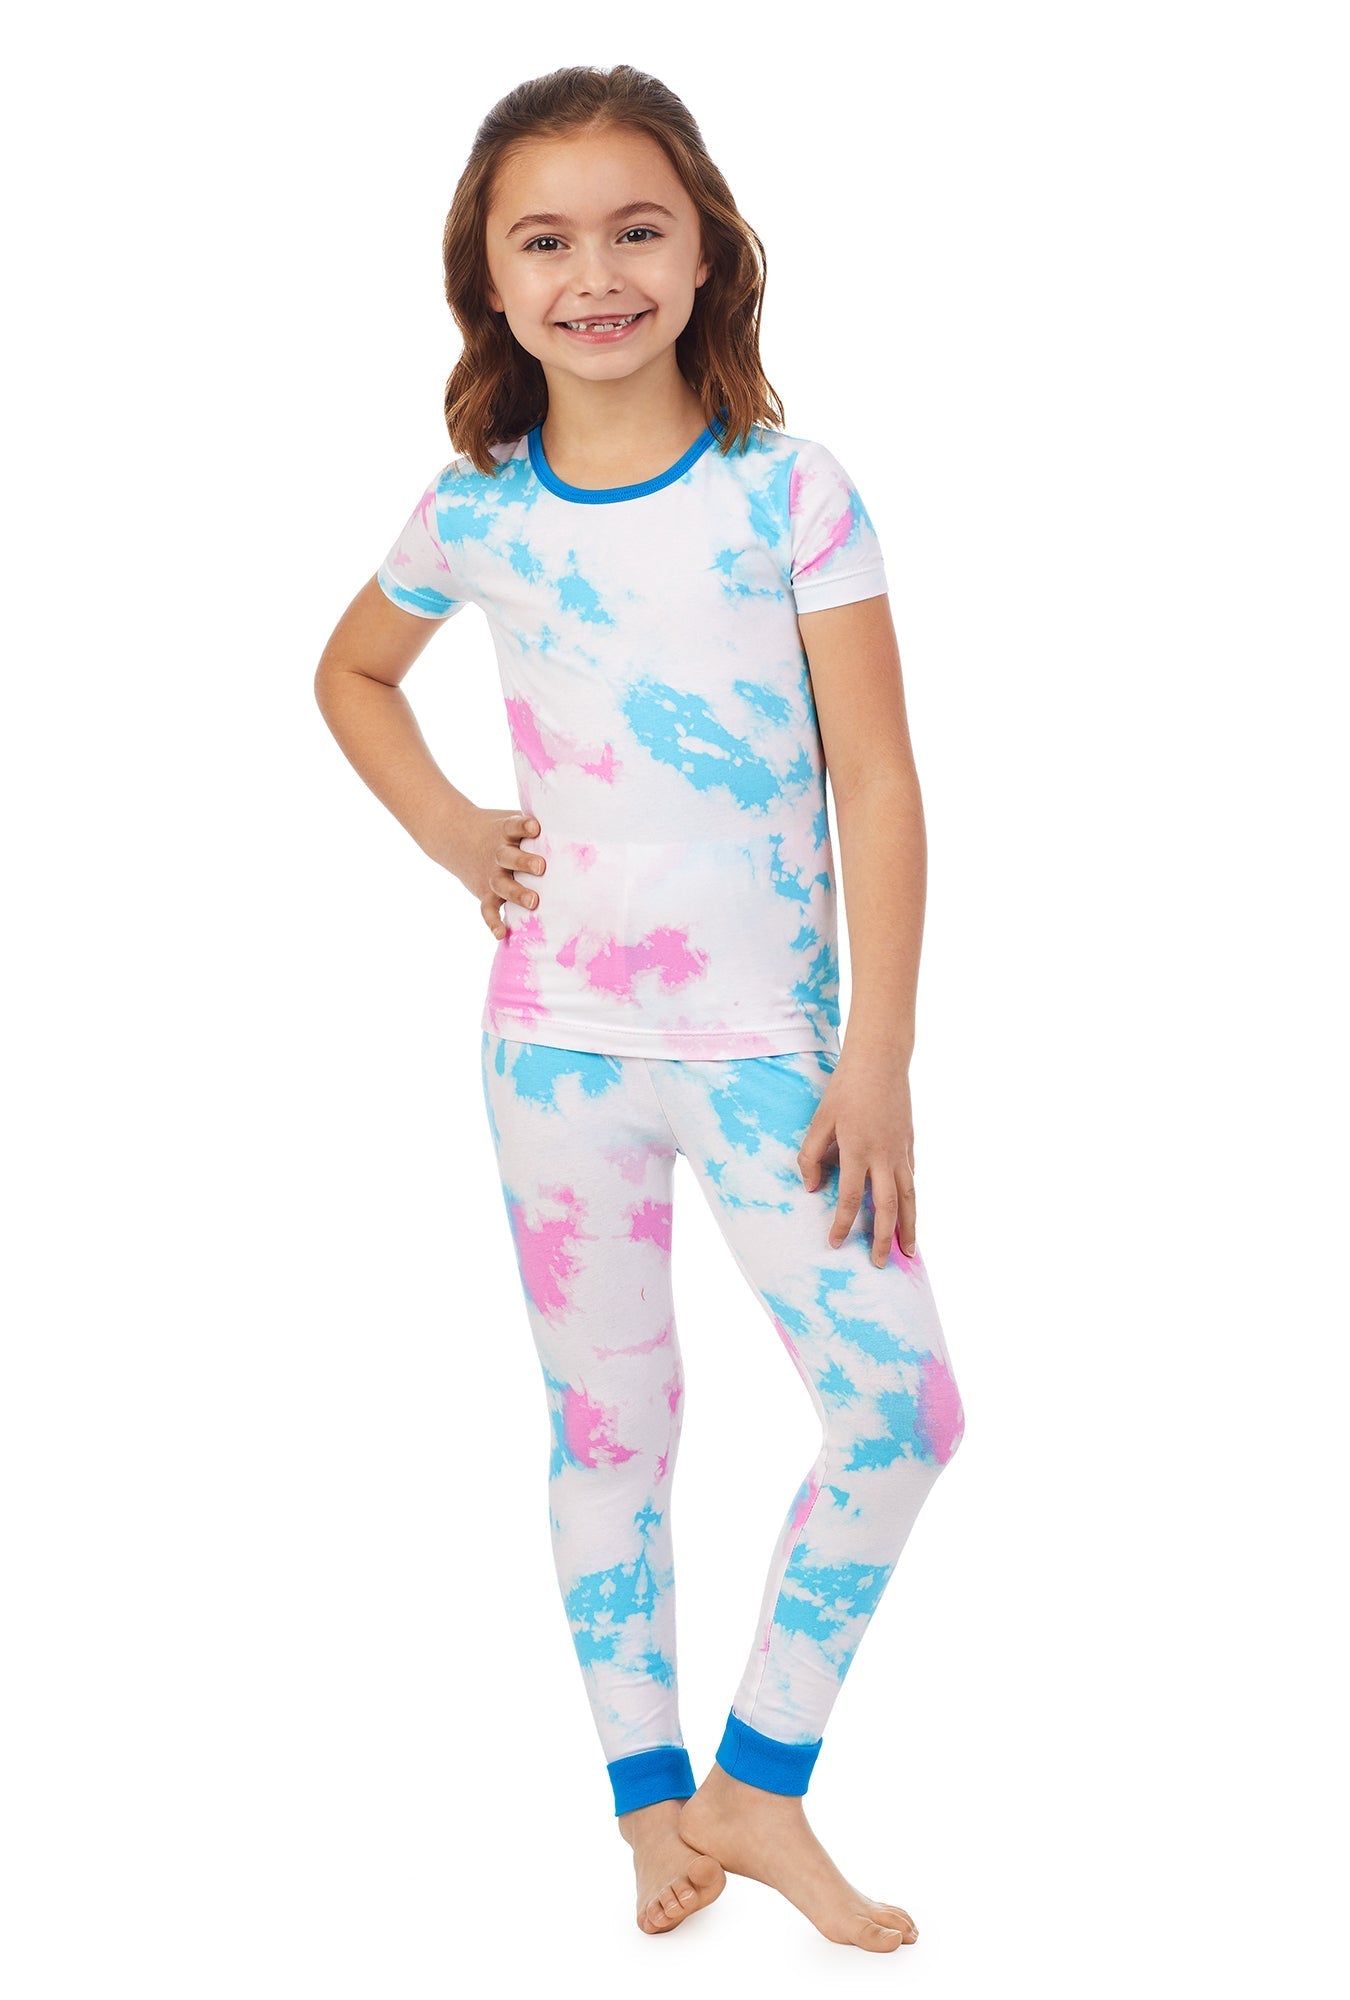 A kid wearing a white short sleeve pj set with multicolor tiedye pattern.